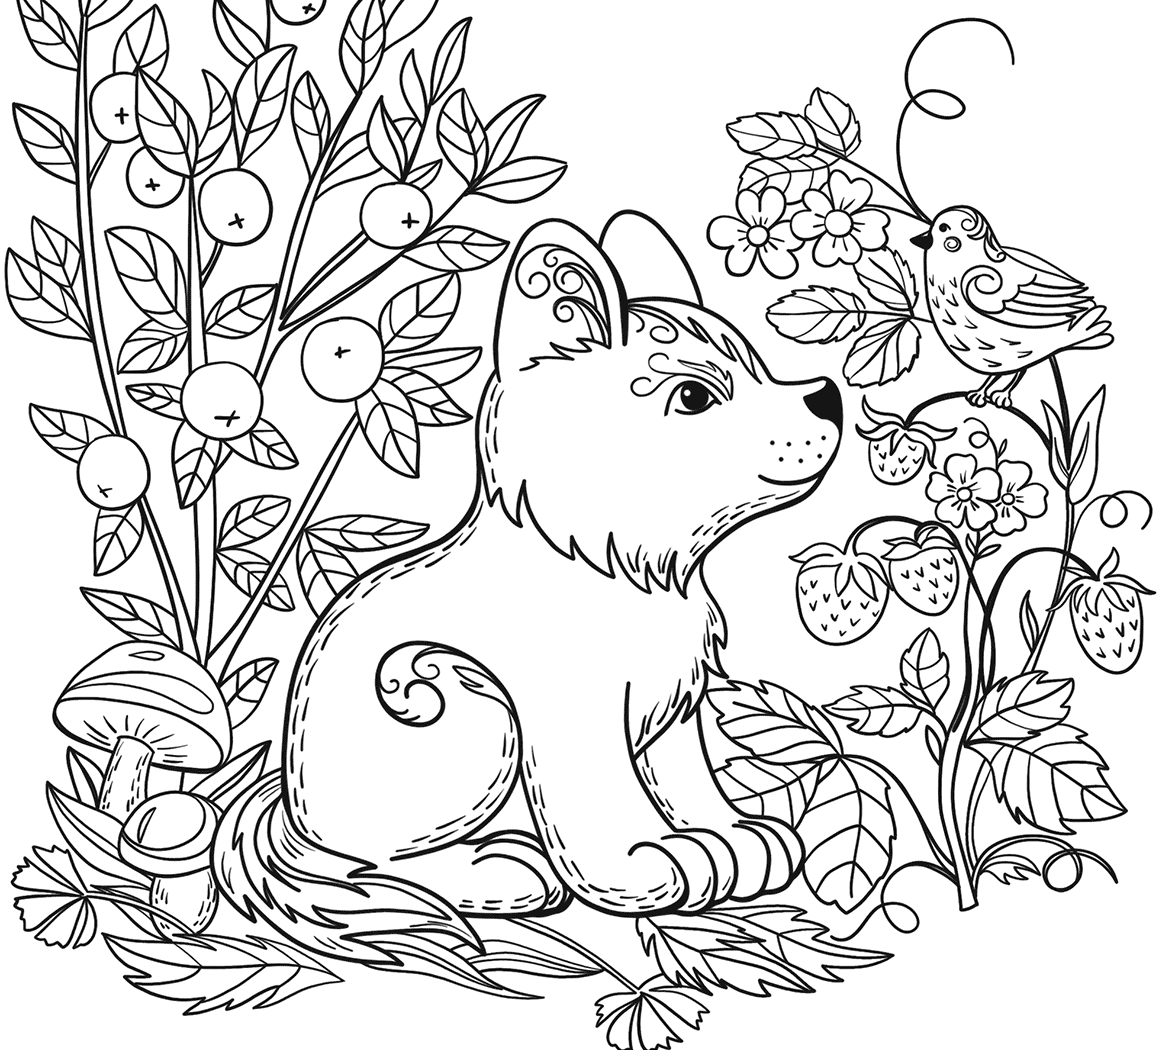 adult coloring book image animal with wreath